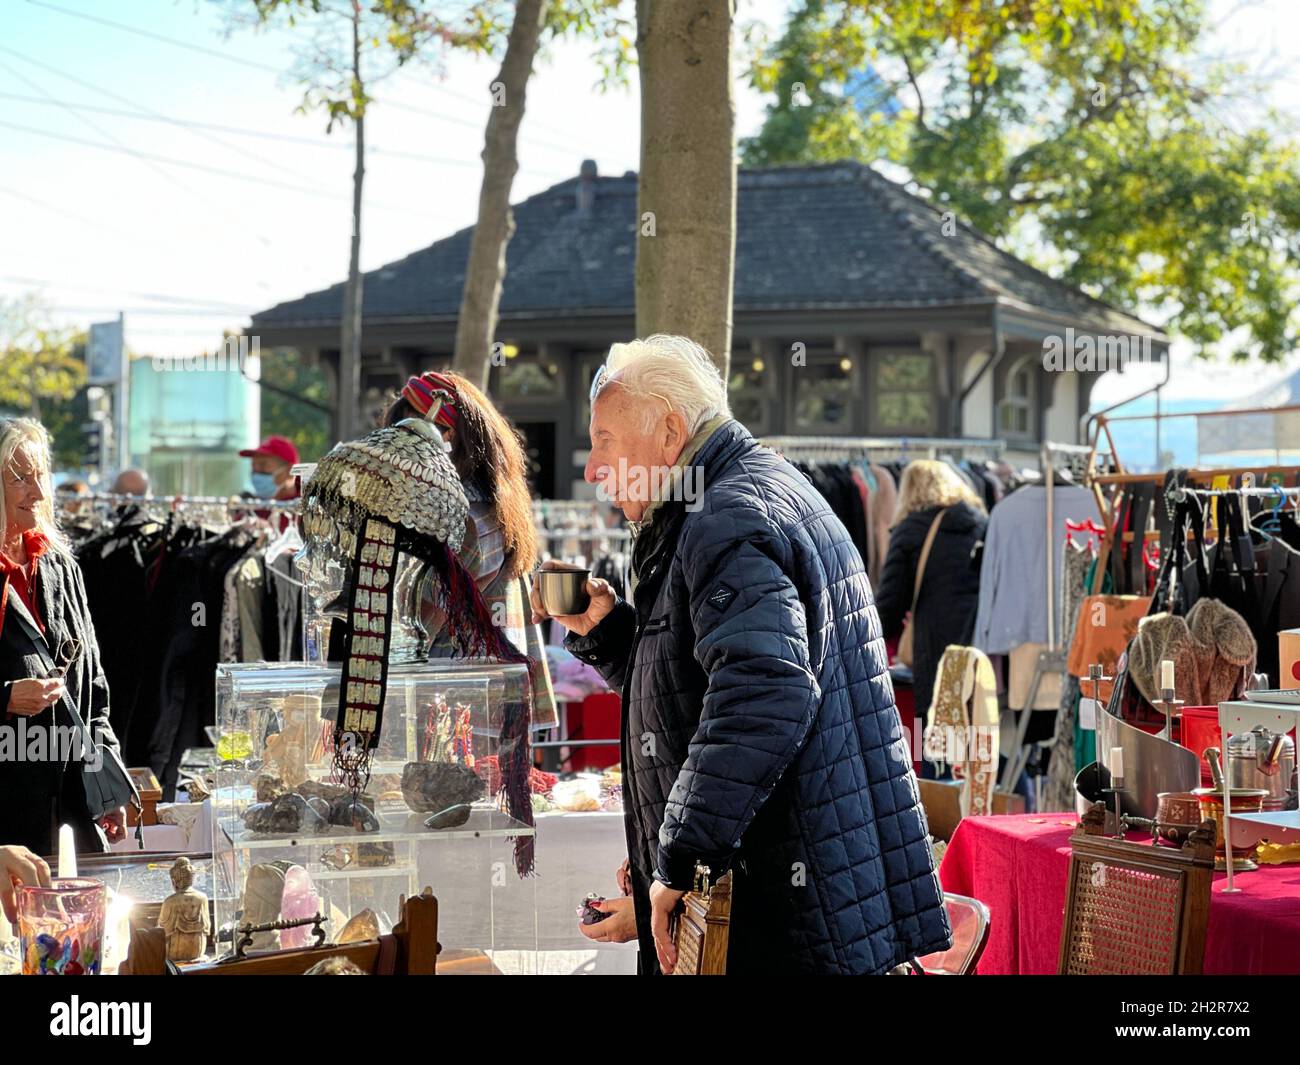 Vendor at flea market is drinking coffee from a flask. He is at his stall selling vintage and rare merchandise. Elderly man is captured in side view. Stock Photo